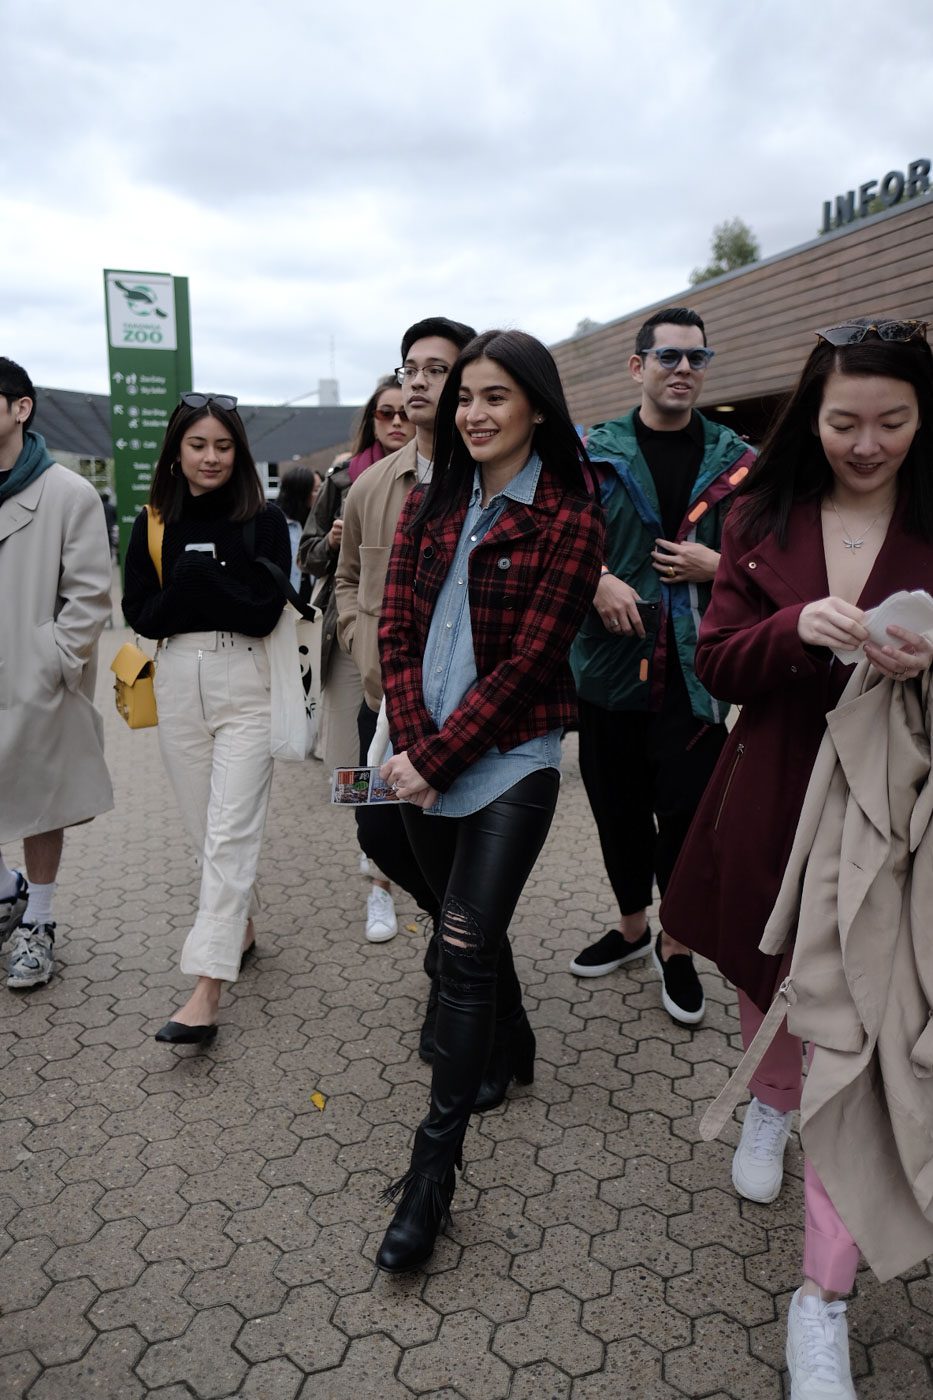 TRIP TO THE ZOO. Anne Curtis and friends on their way to Taronga Zoo. 